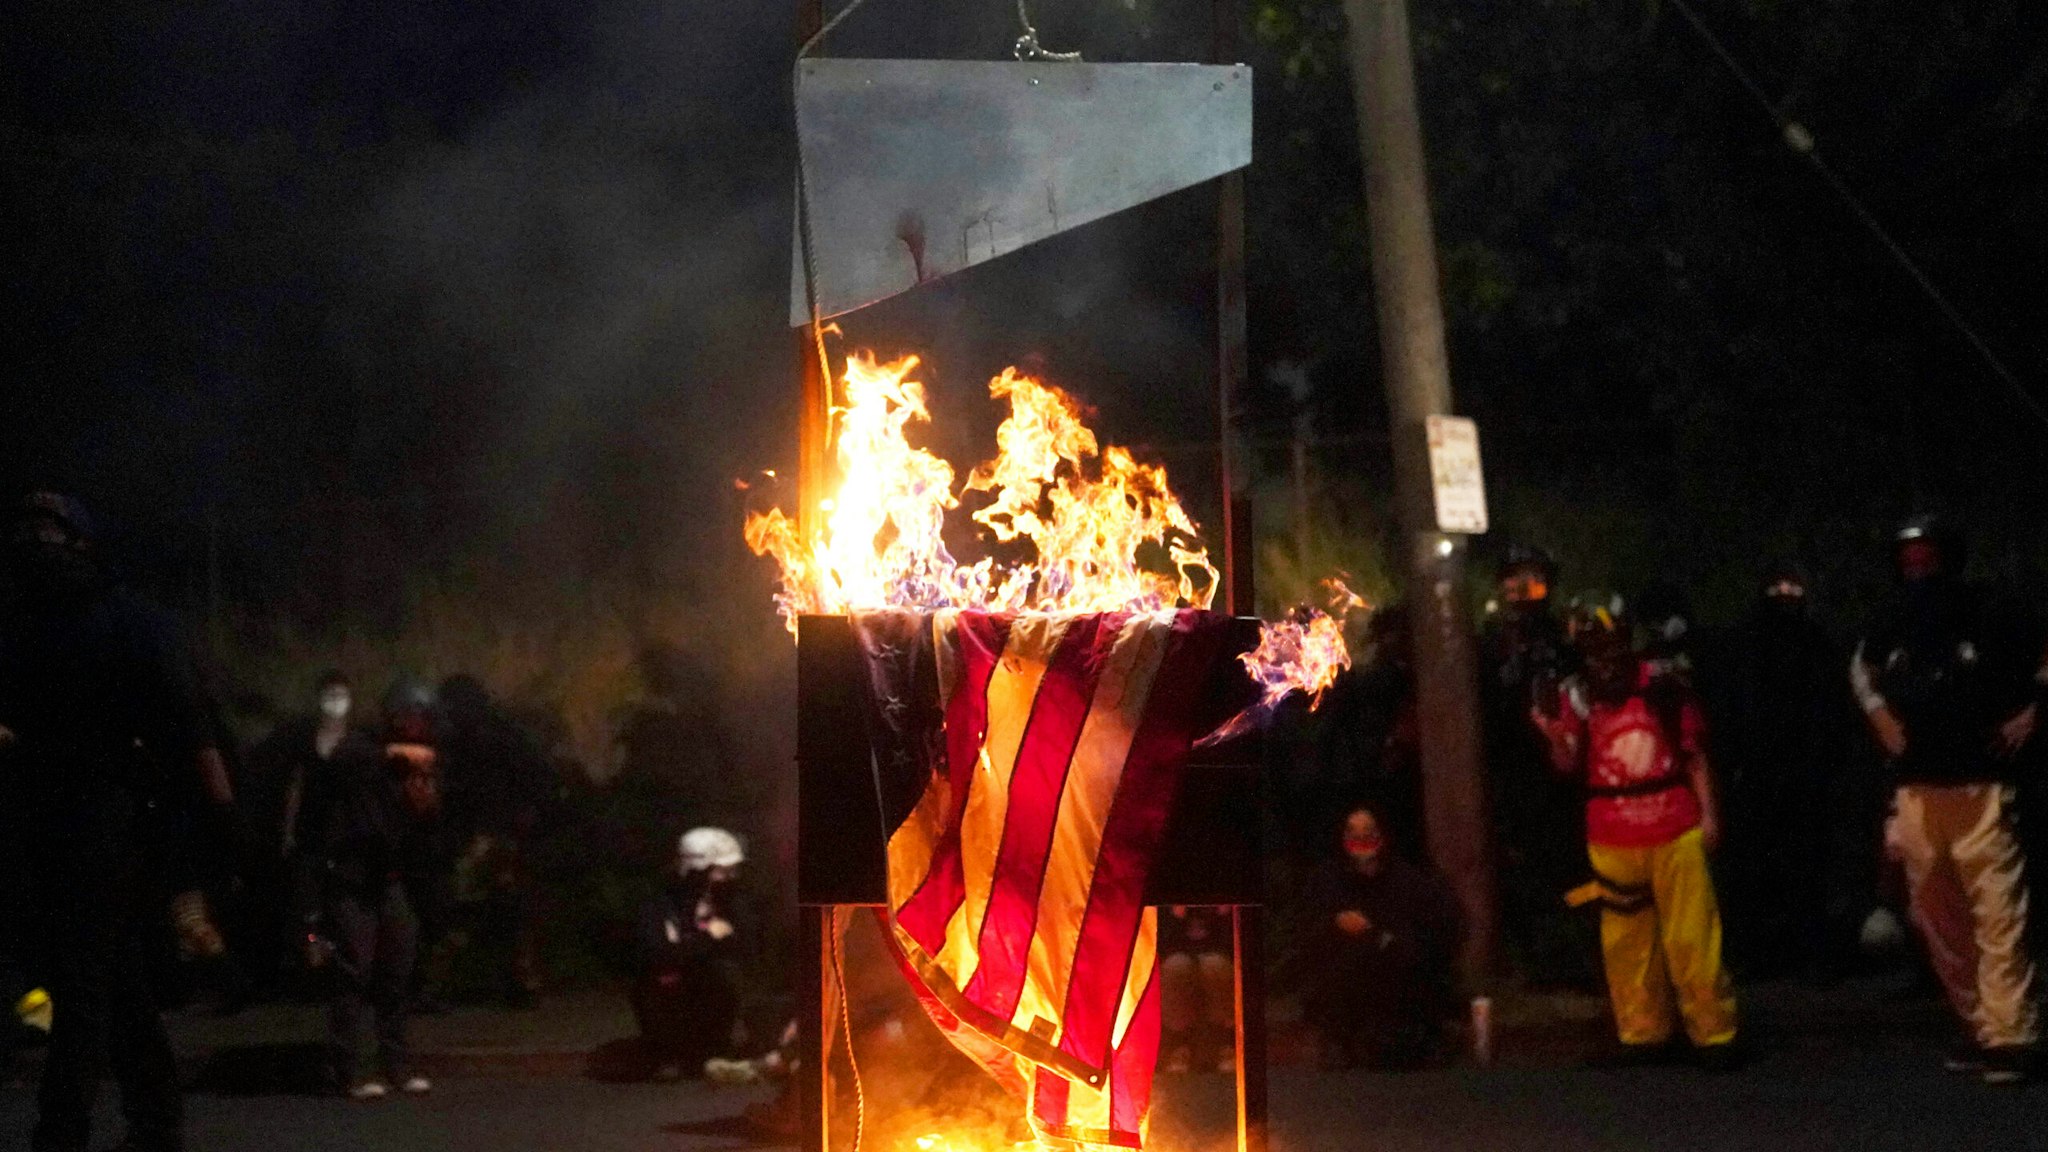 PORTLAND, OR - AUGUST 22: An American flag burns in front of the Multnomah County Sheriffs Office on August 22, 2020 in Portland, Oregon. Hundreds of protesters clashed with police Saturday night following a rally in east Portland.